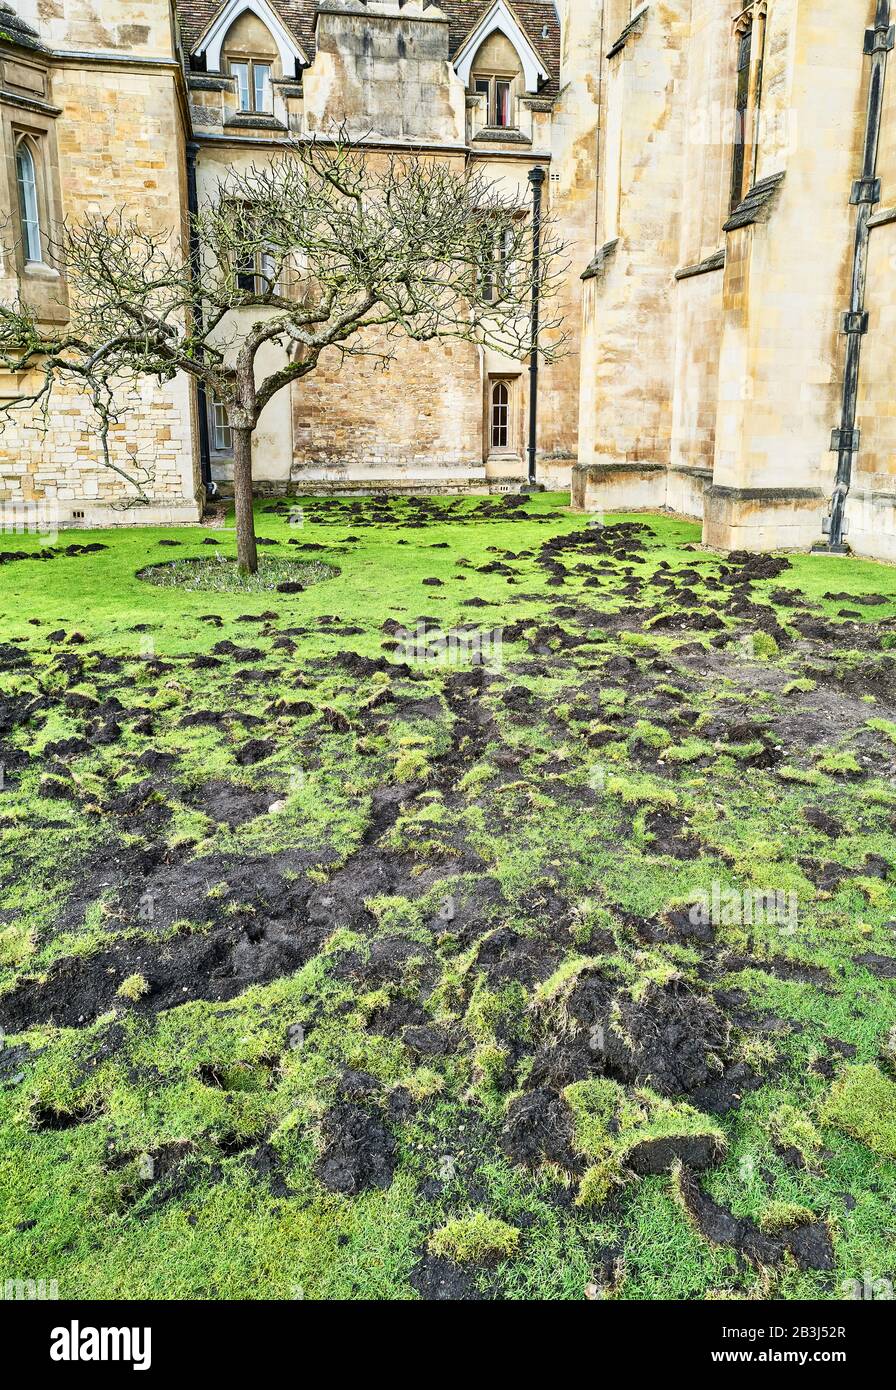 The lawn around the Isaac Newton tree at Trinity college, Cambridge university, England, vandalised by climate activists, Extinction Rebellion members. Stock Photo